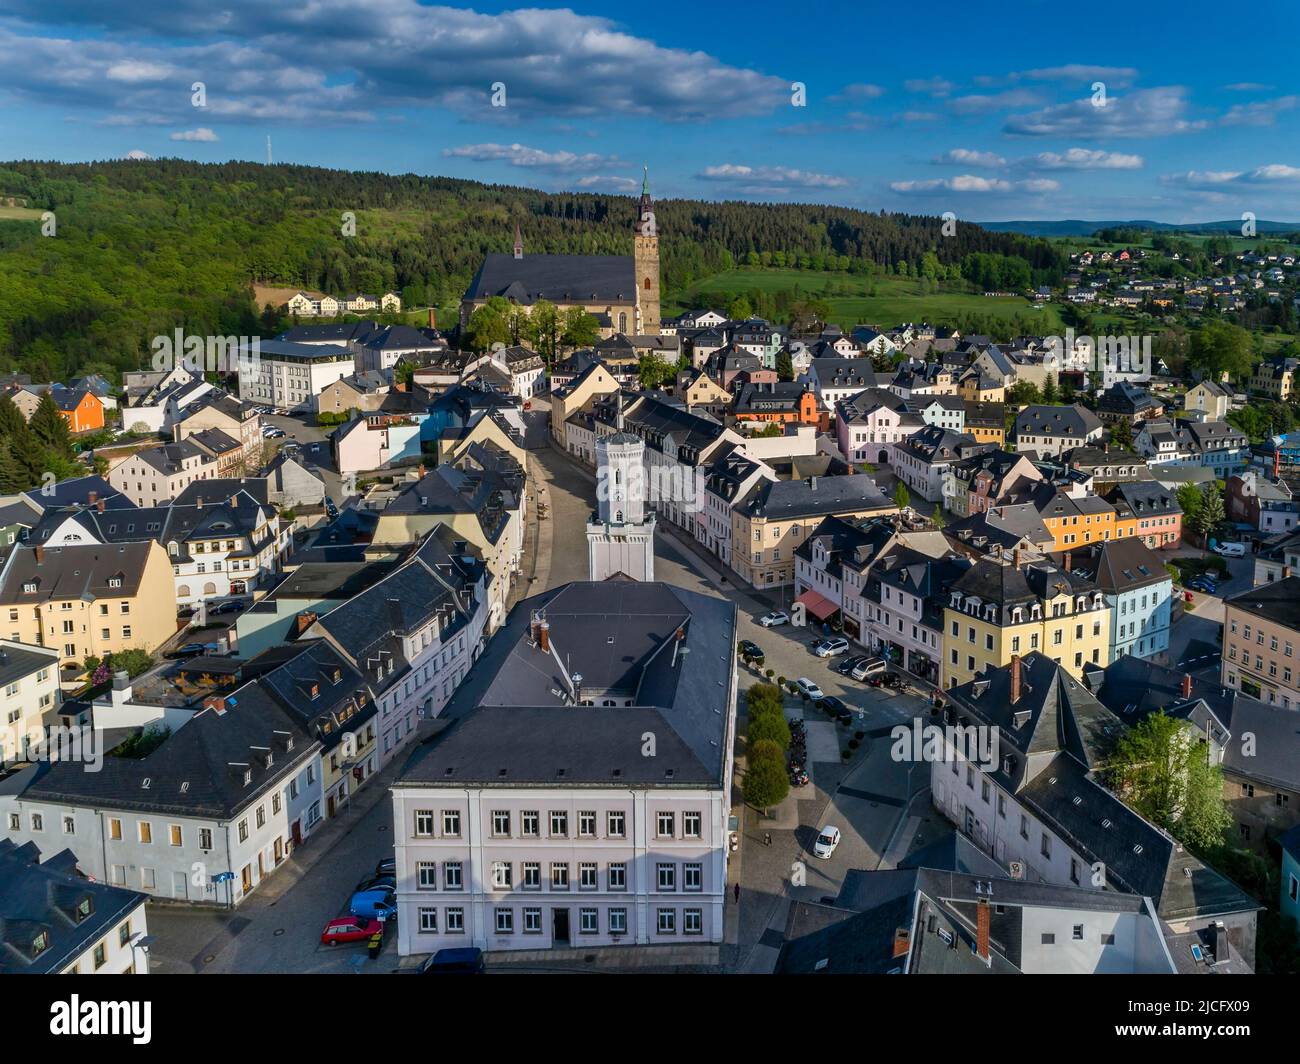 City center of Schneeberg: The Saxon town of Schneeberg is located on the Silberstrasse in the upper Western Ore Mountains. View over the town hall to the striking St. Wolfgang Church, which can be seen from afar. Stock Photo